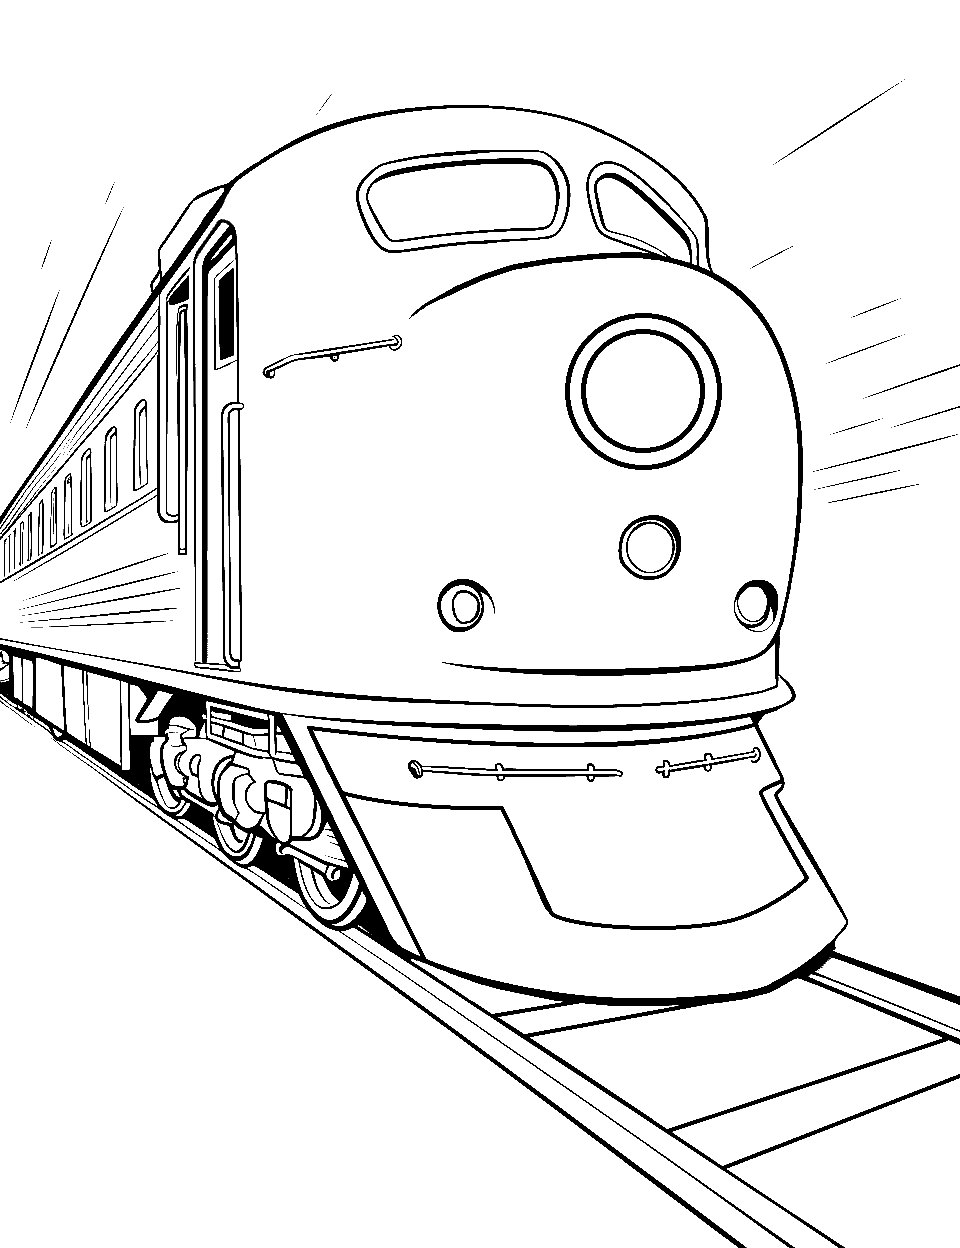 Speedy Train Coloring Page - A super-fast train zooming down the tracks.